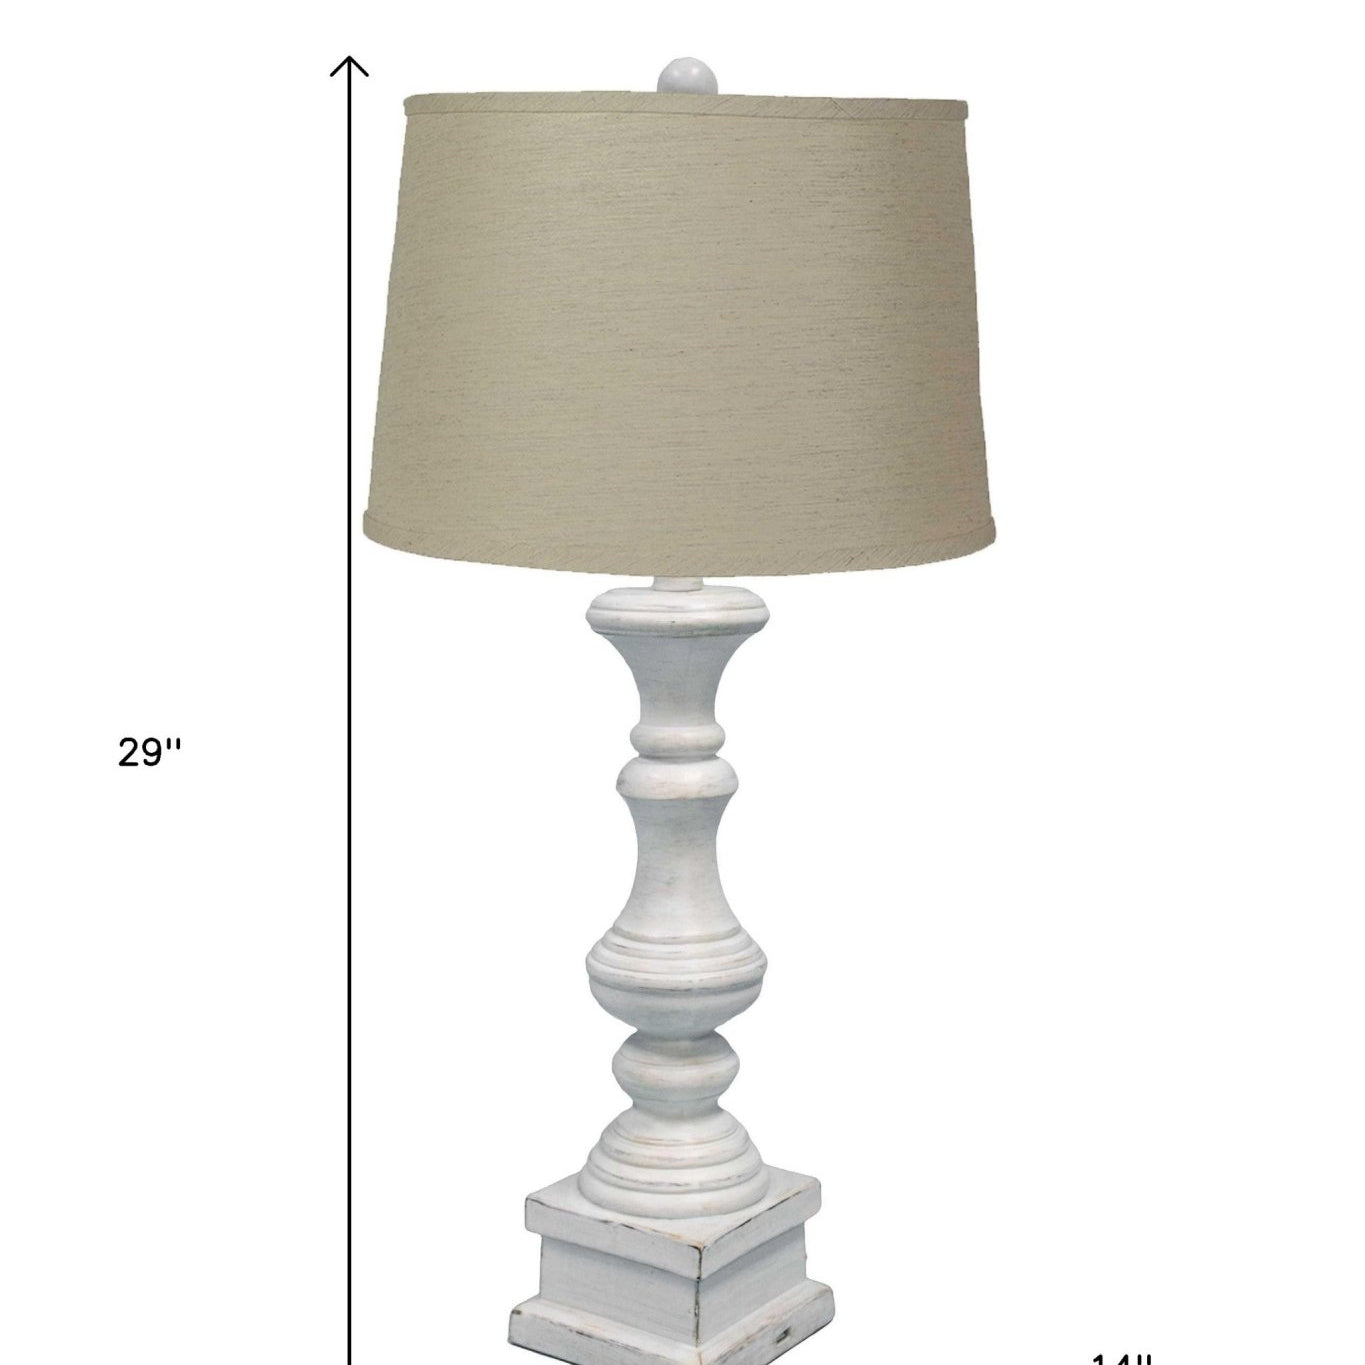 29" Antiqued White With Beige Shade - Tuesday Morning-Table Lamps